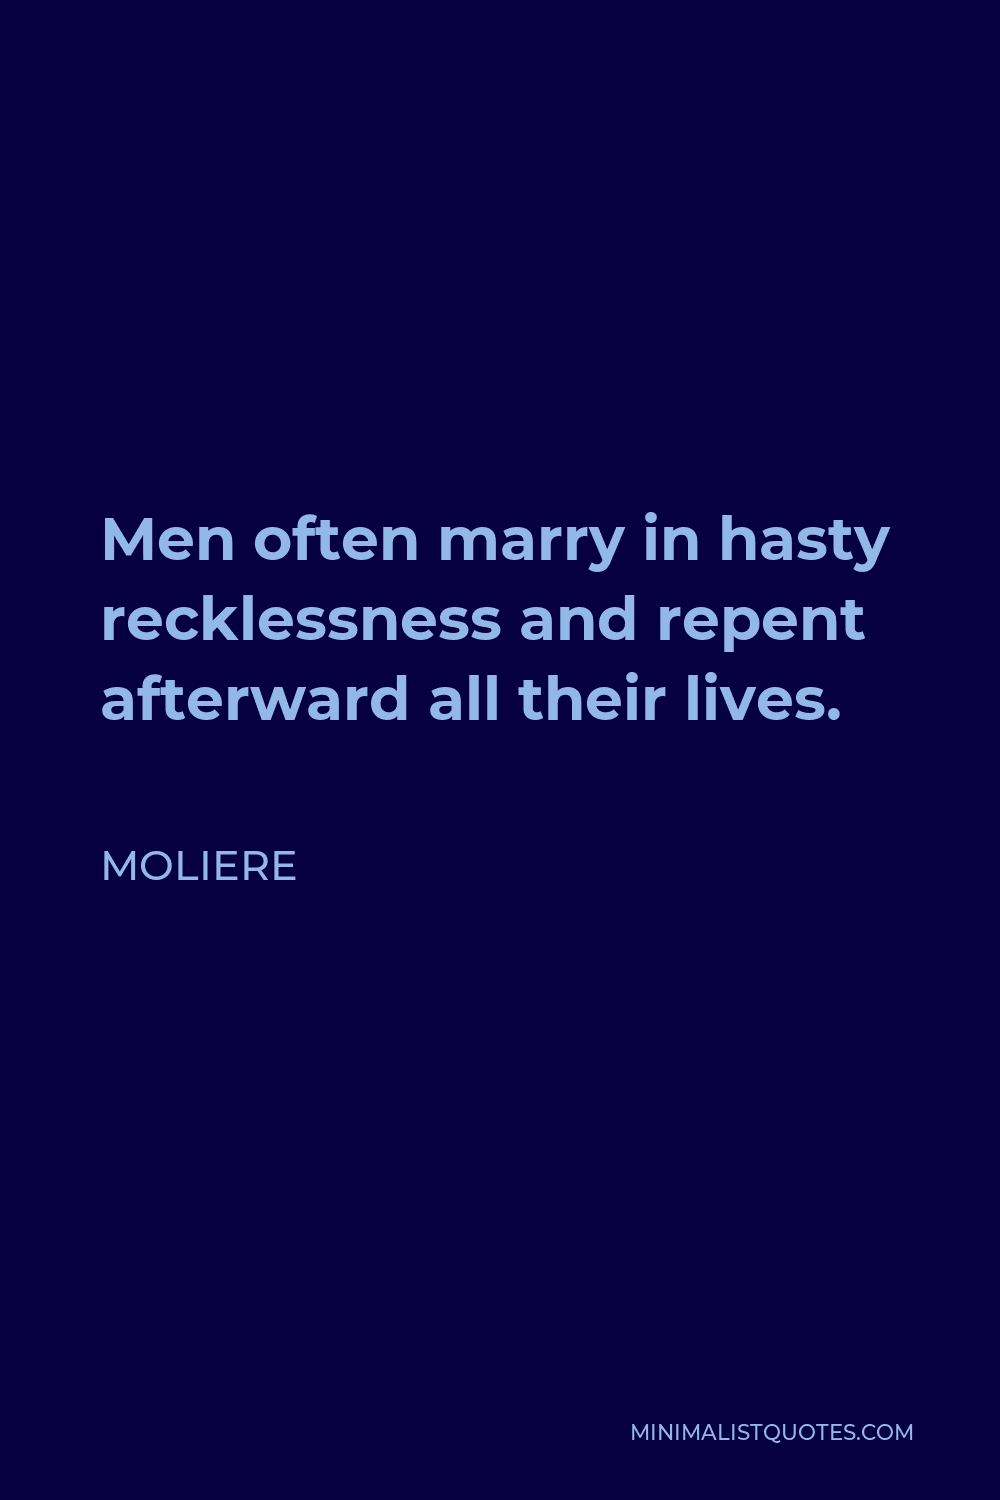 Moliere Quote - Men often marry in hasty recklessness and repent afterward all their lives.